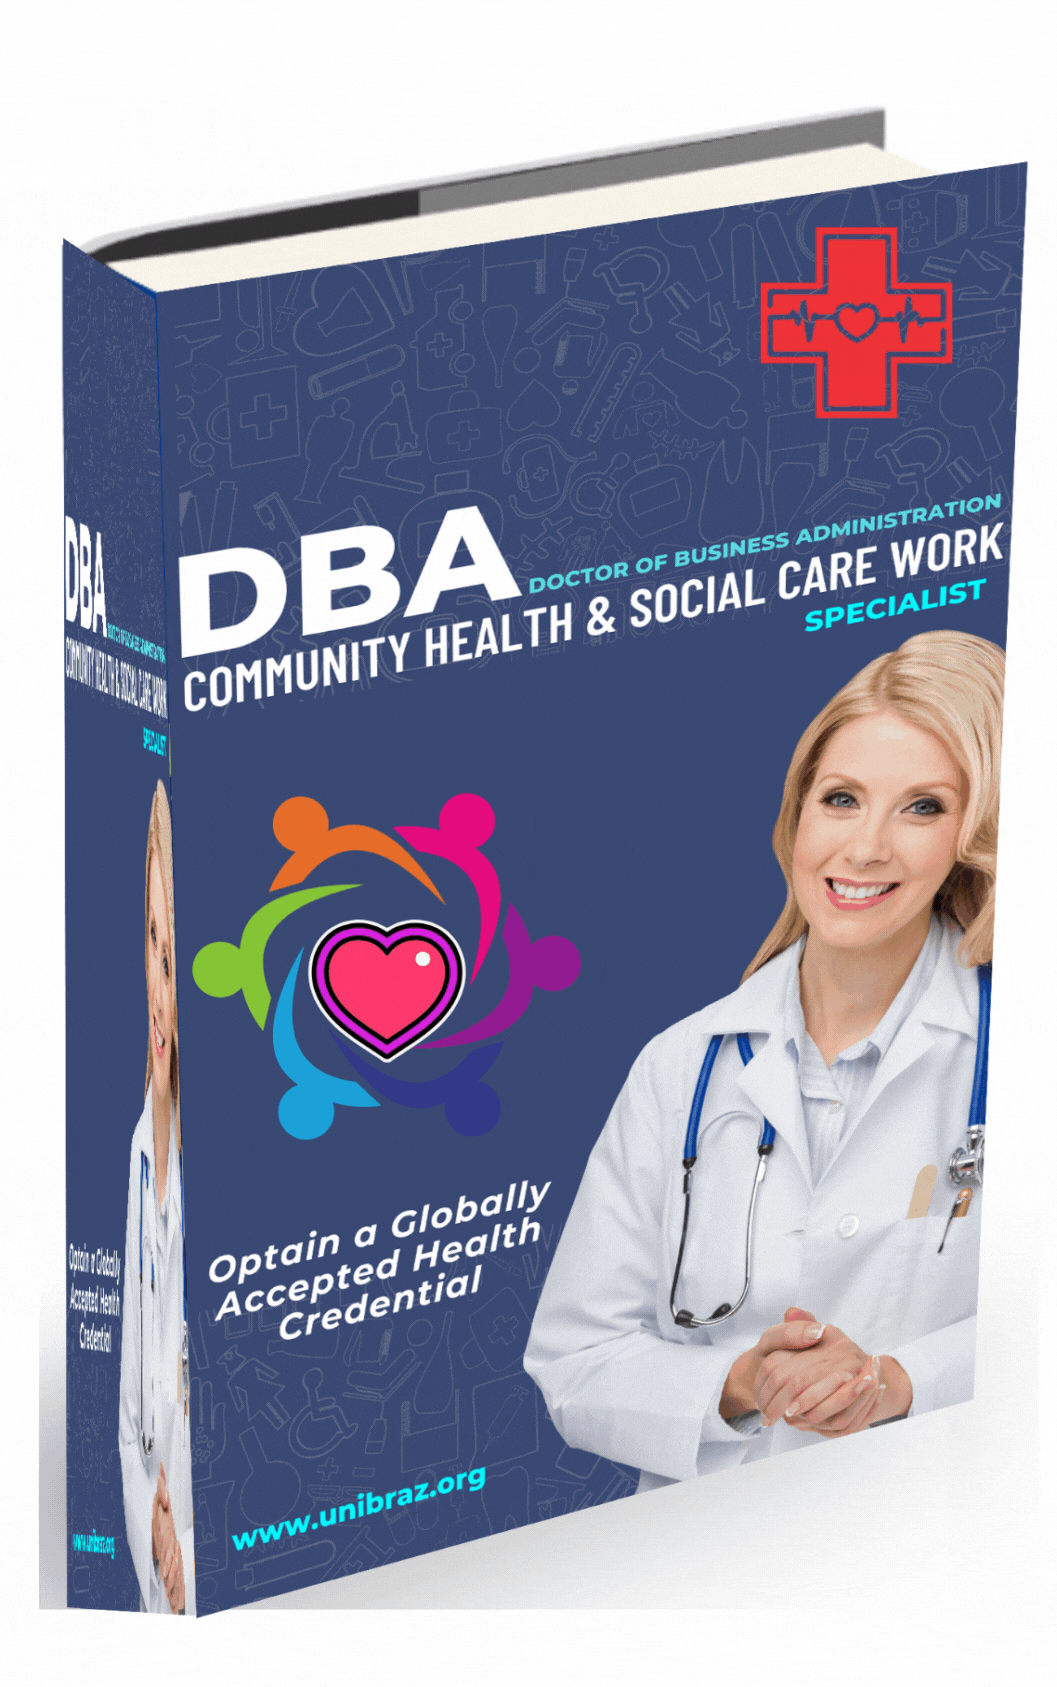 DOCTOR OF BUSINESS ADMINISTRATION (DBA). COMMUNITY HEALTH & SOCIAL CARE WORK